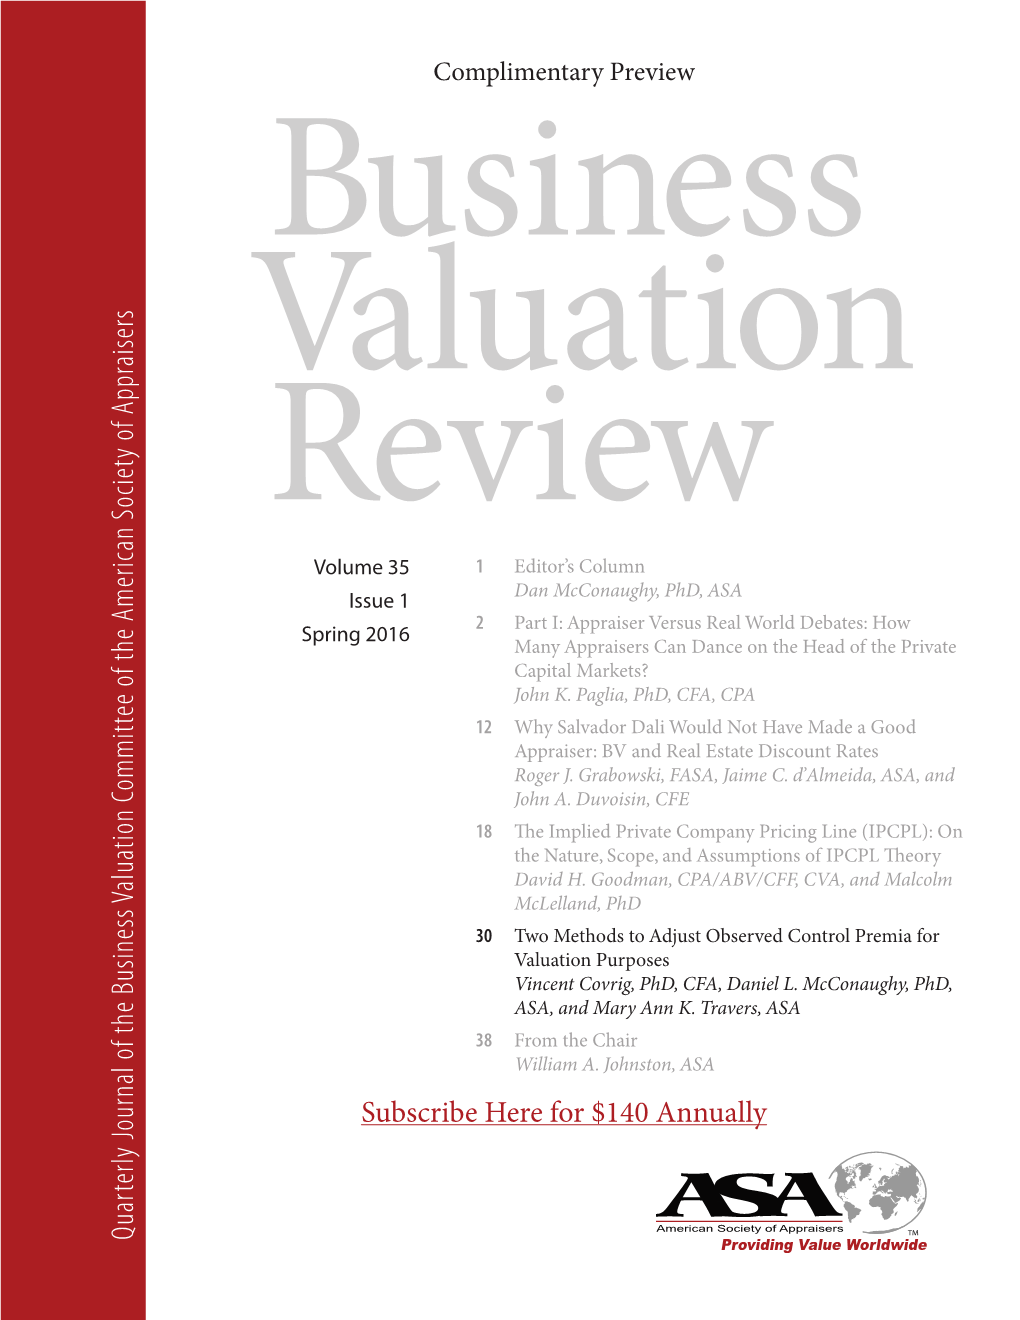 Quarterly Journal of the Business Valuation Committee of The